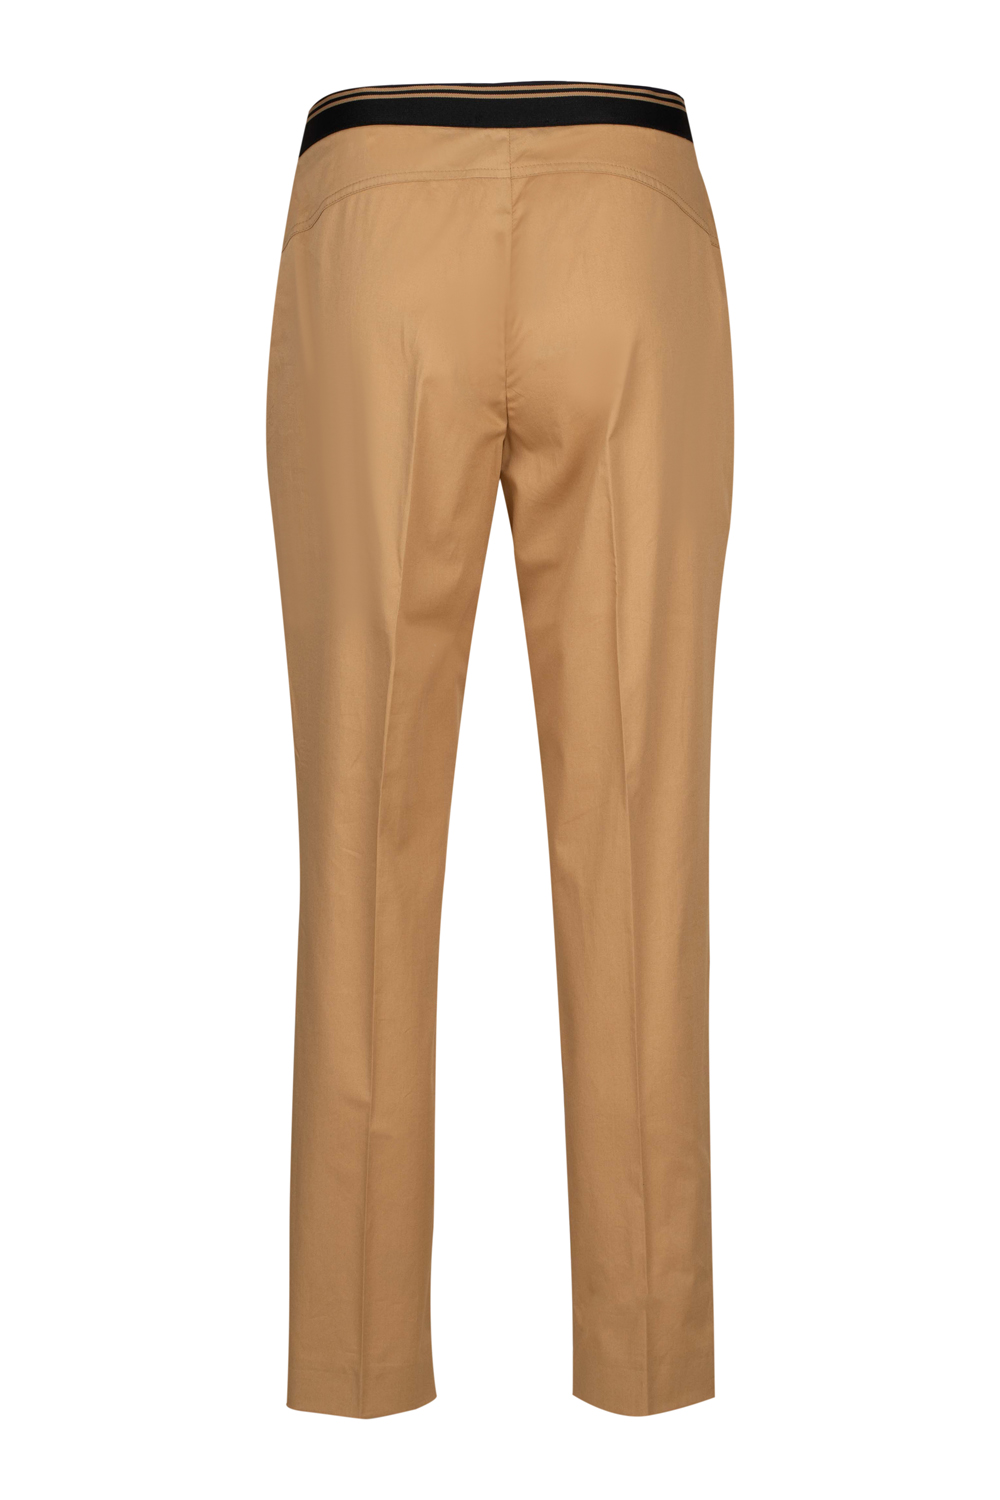 7/8 Cotton Trousers with Elasticated Back Waistband